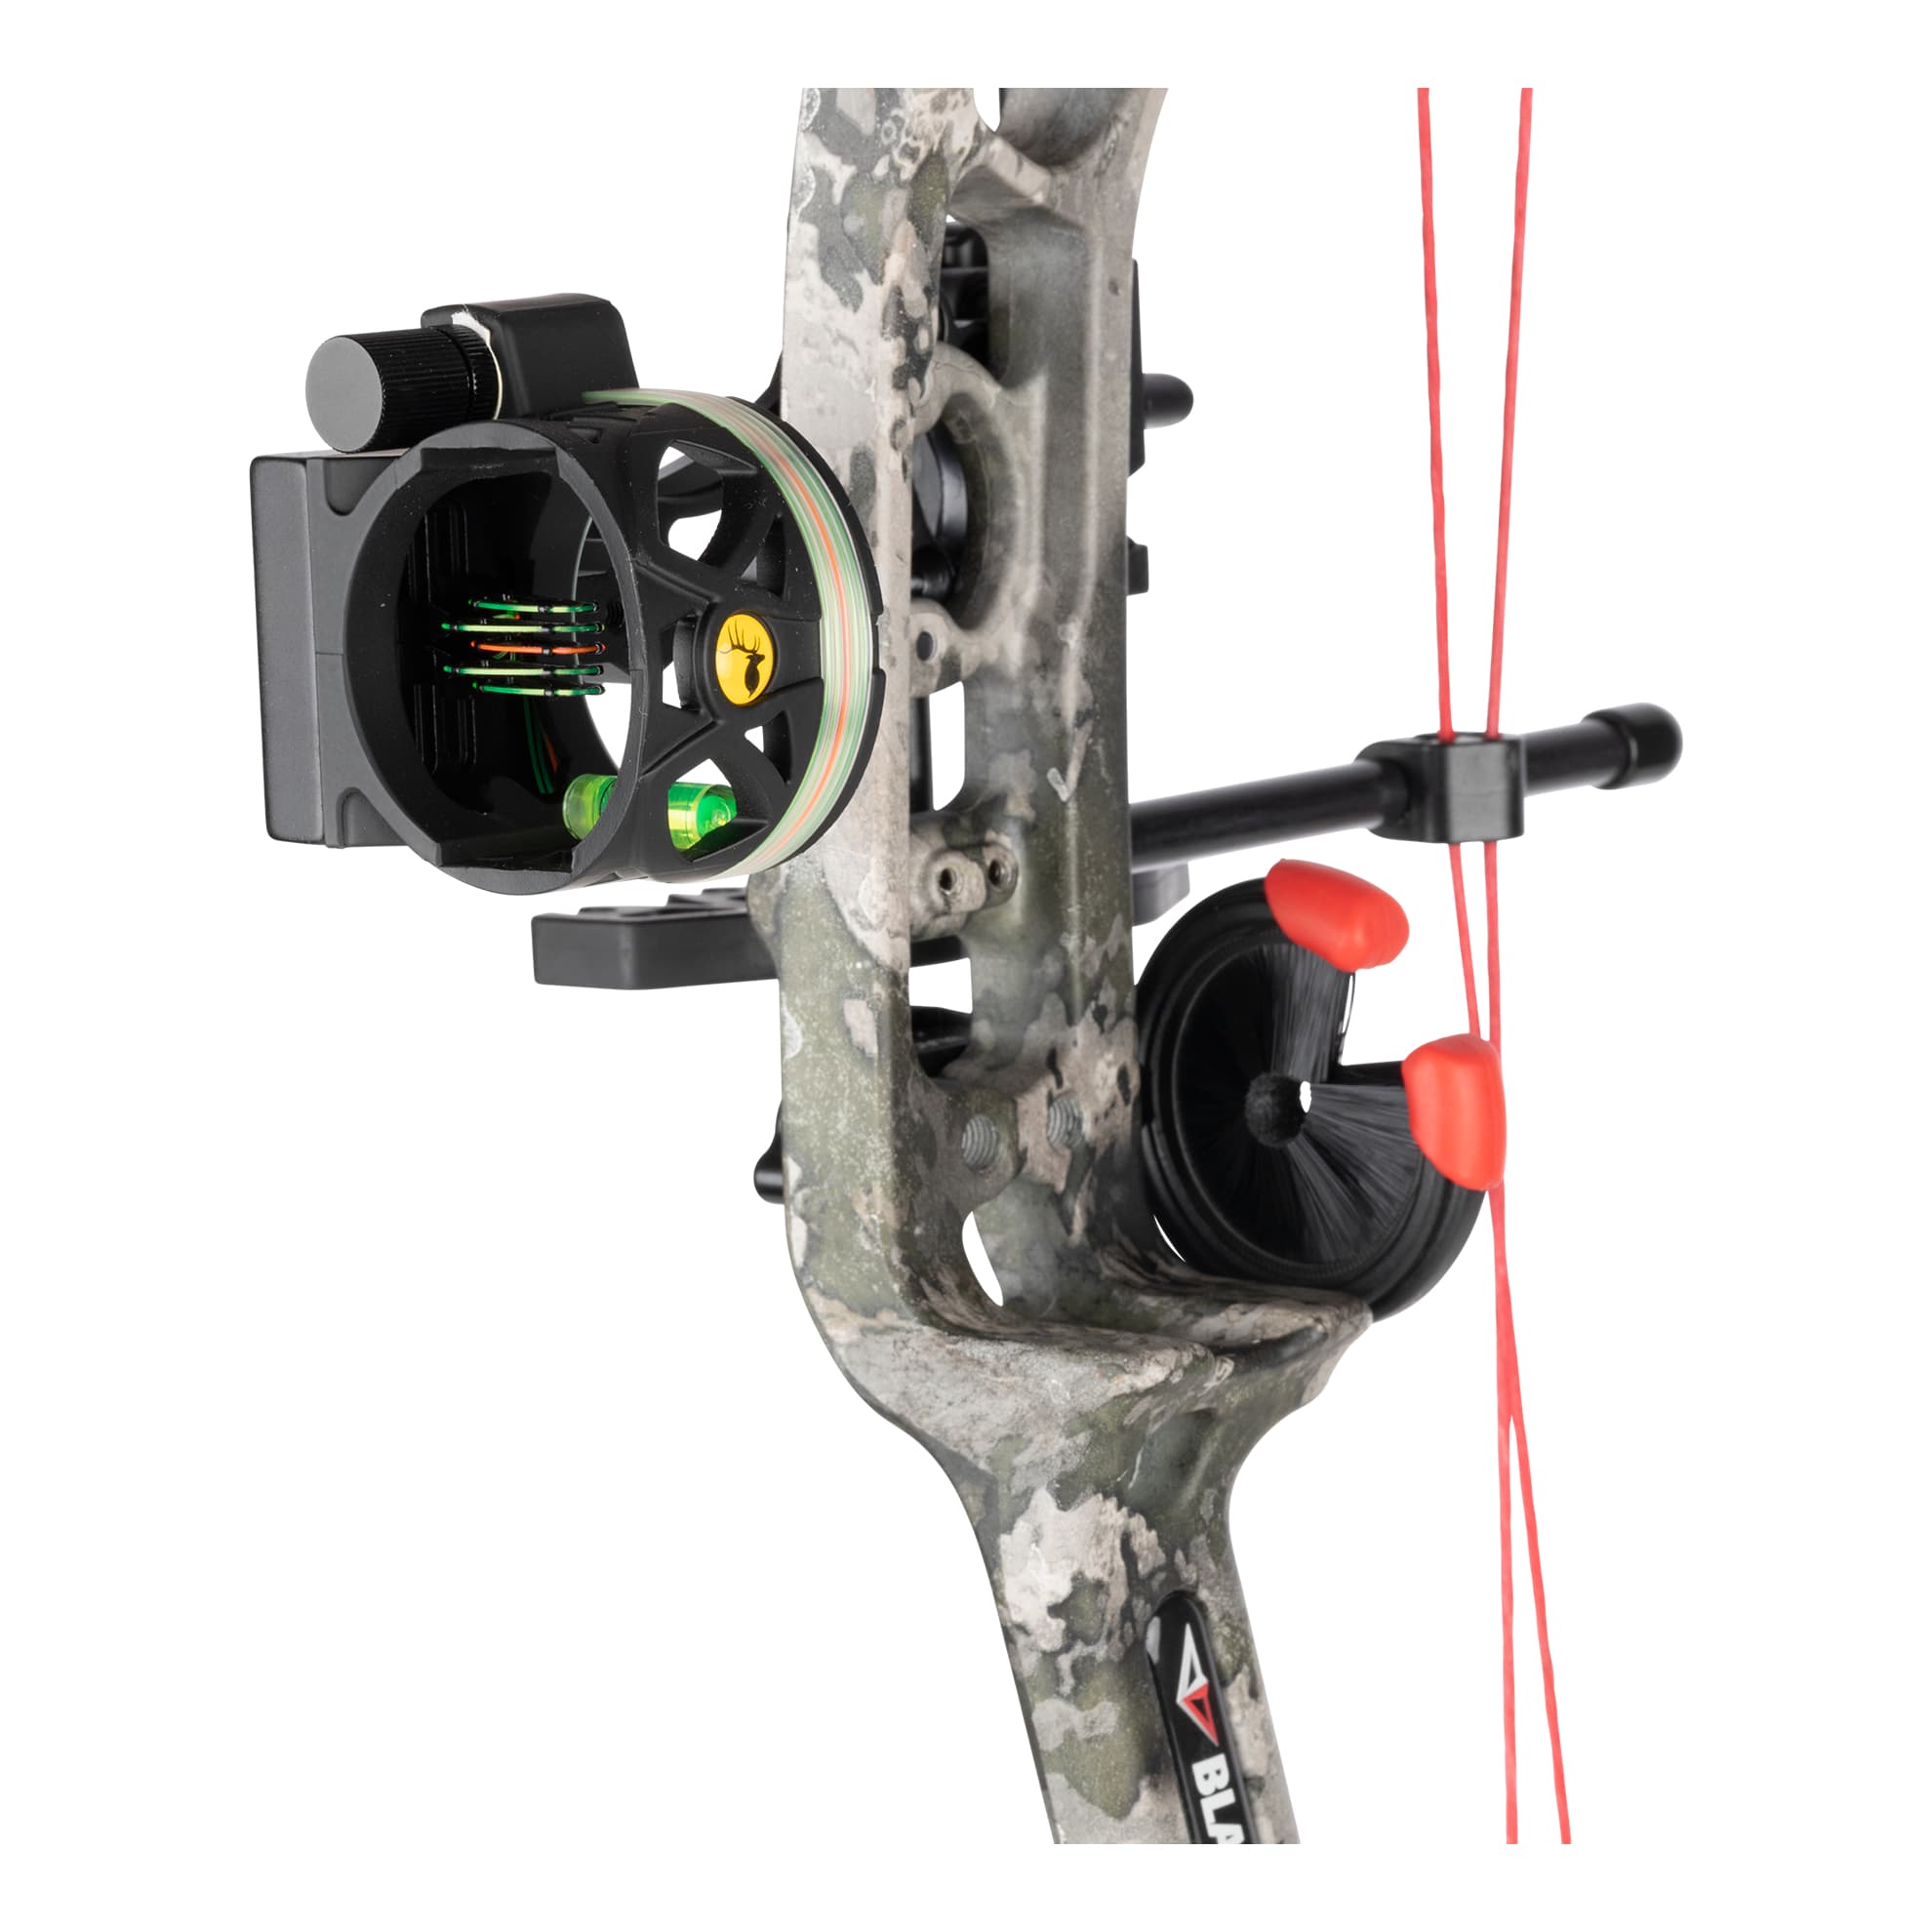 BlackOut® Epic X2 RTH Compound Bow Package